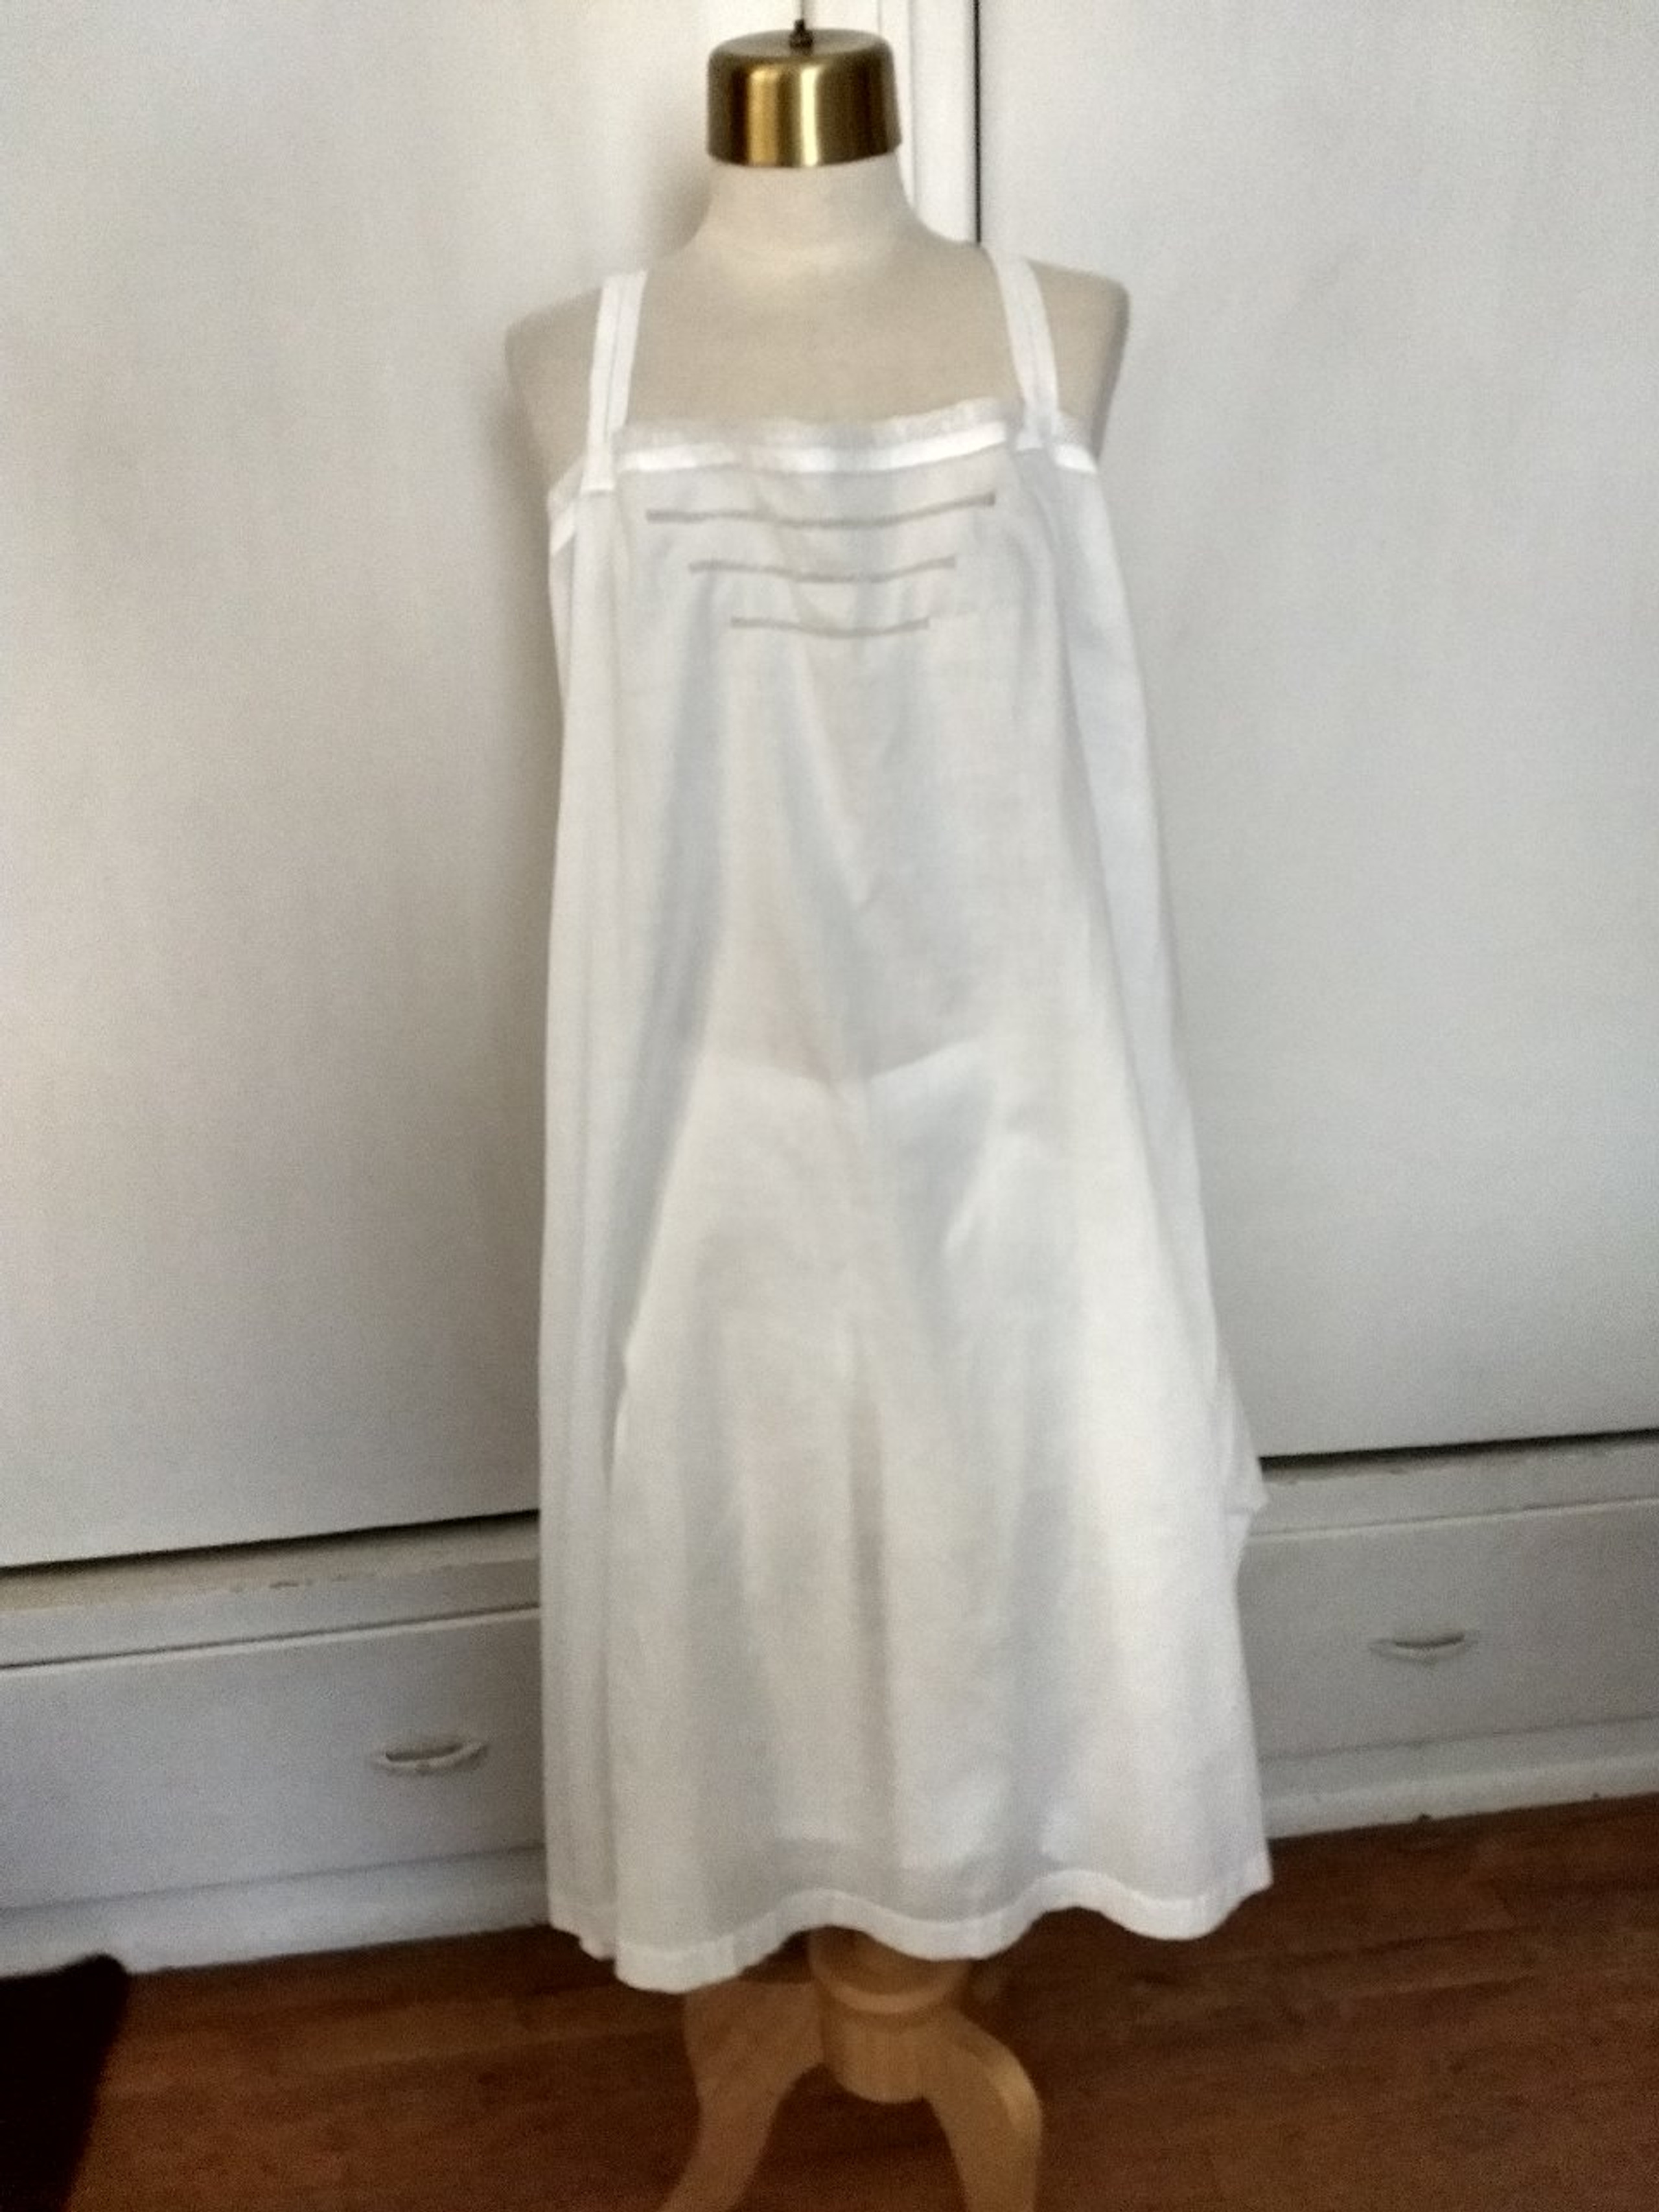 Antique French Cami Kickers Chemise Bloomer 1920s White Cotton Lace ...